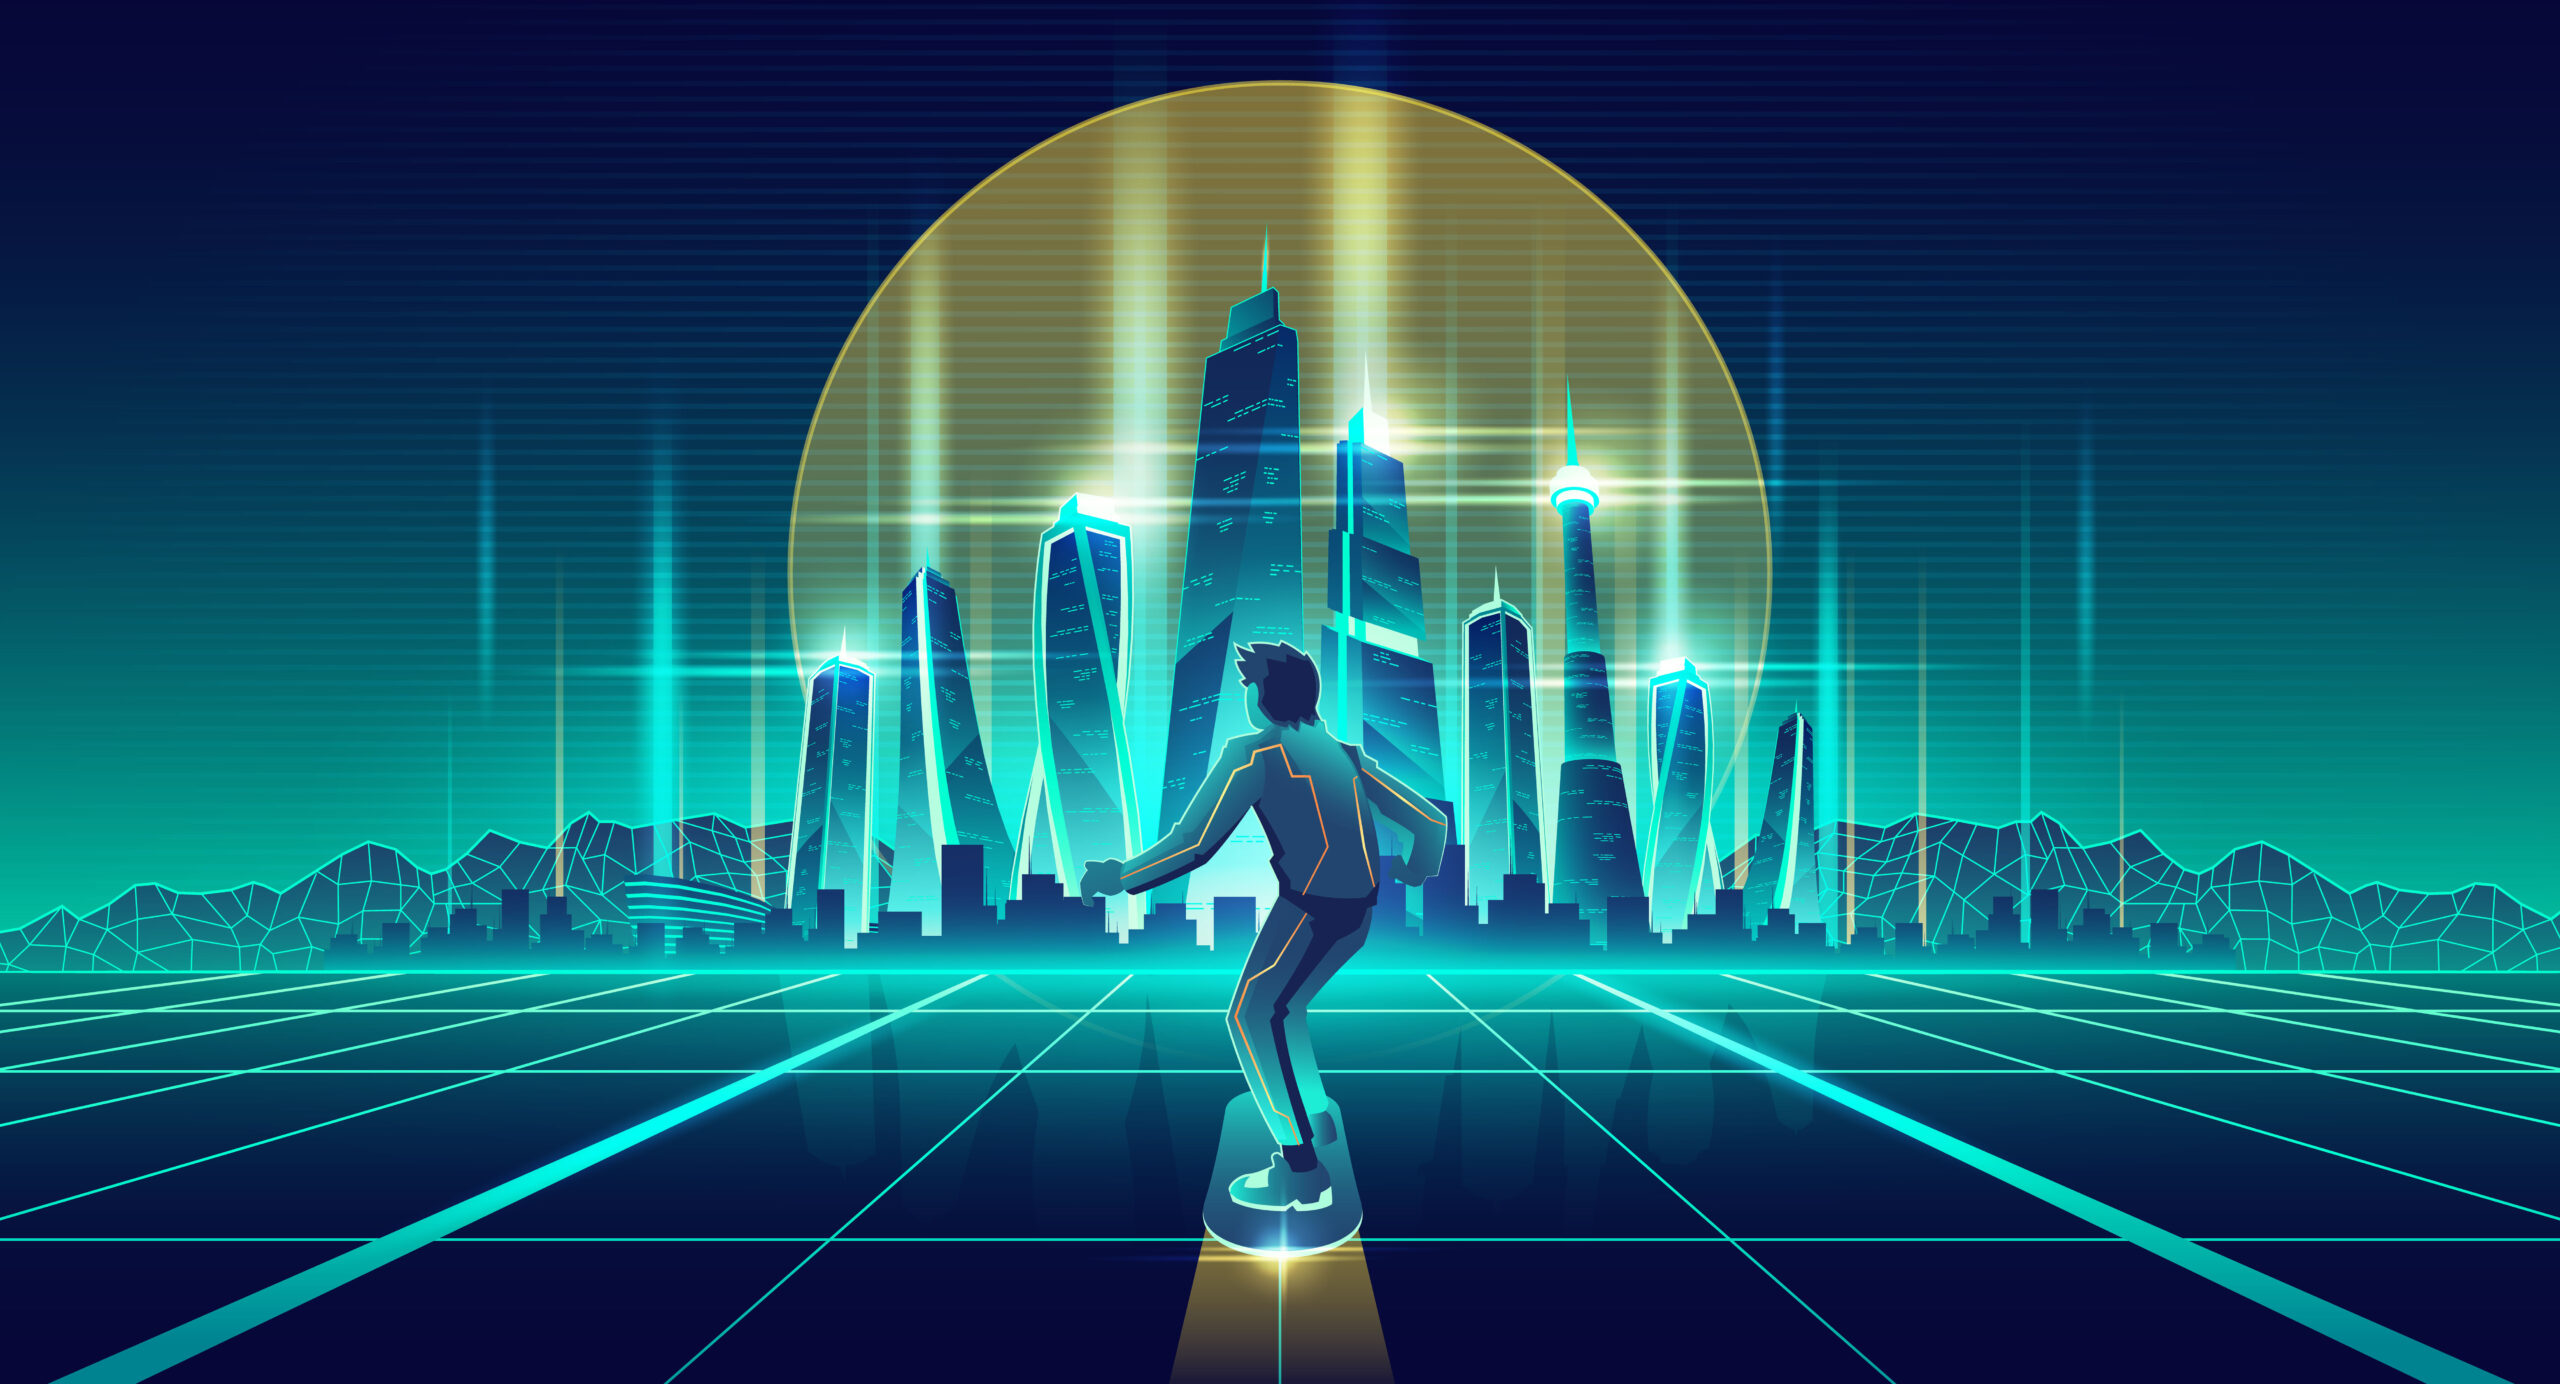 Skateboarding in virtual reality cartoon vector background. Man flying on levitating skateboard under glossy surface with glowing neon grid to futuristic metropolis skyscrapers on horizon illustration